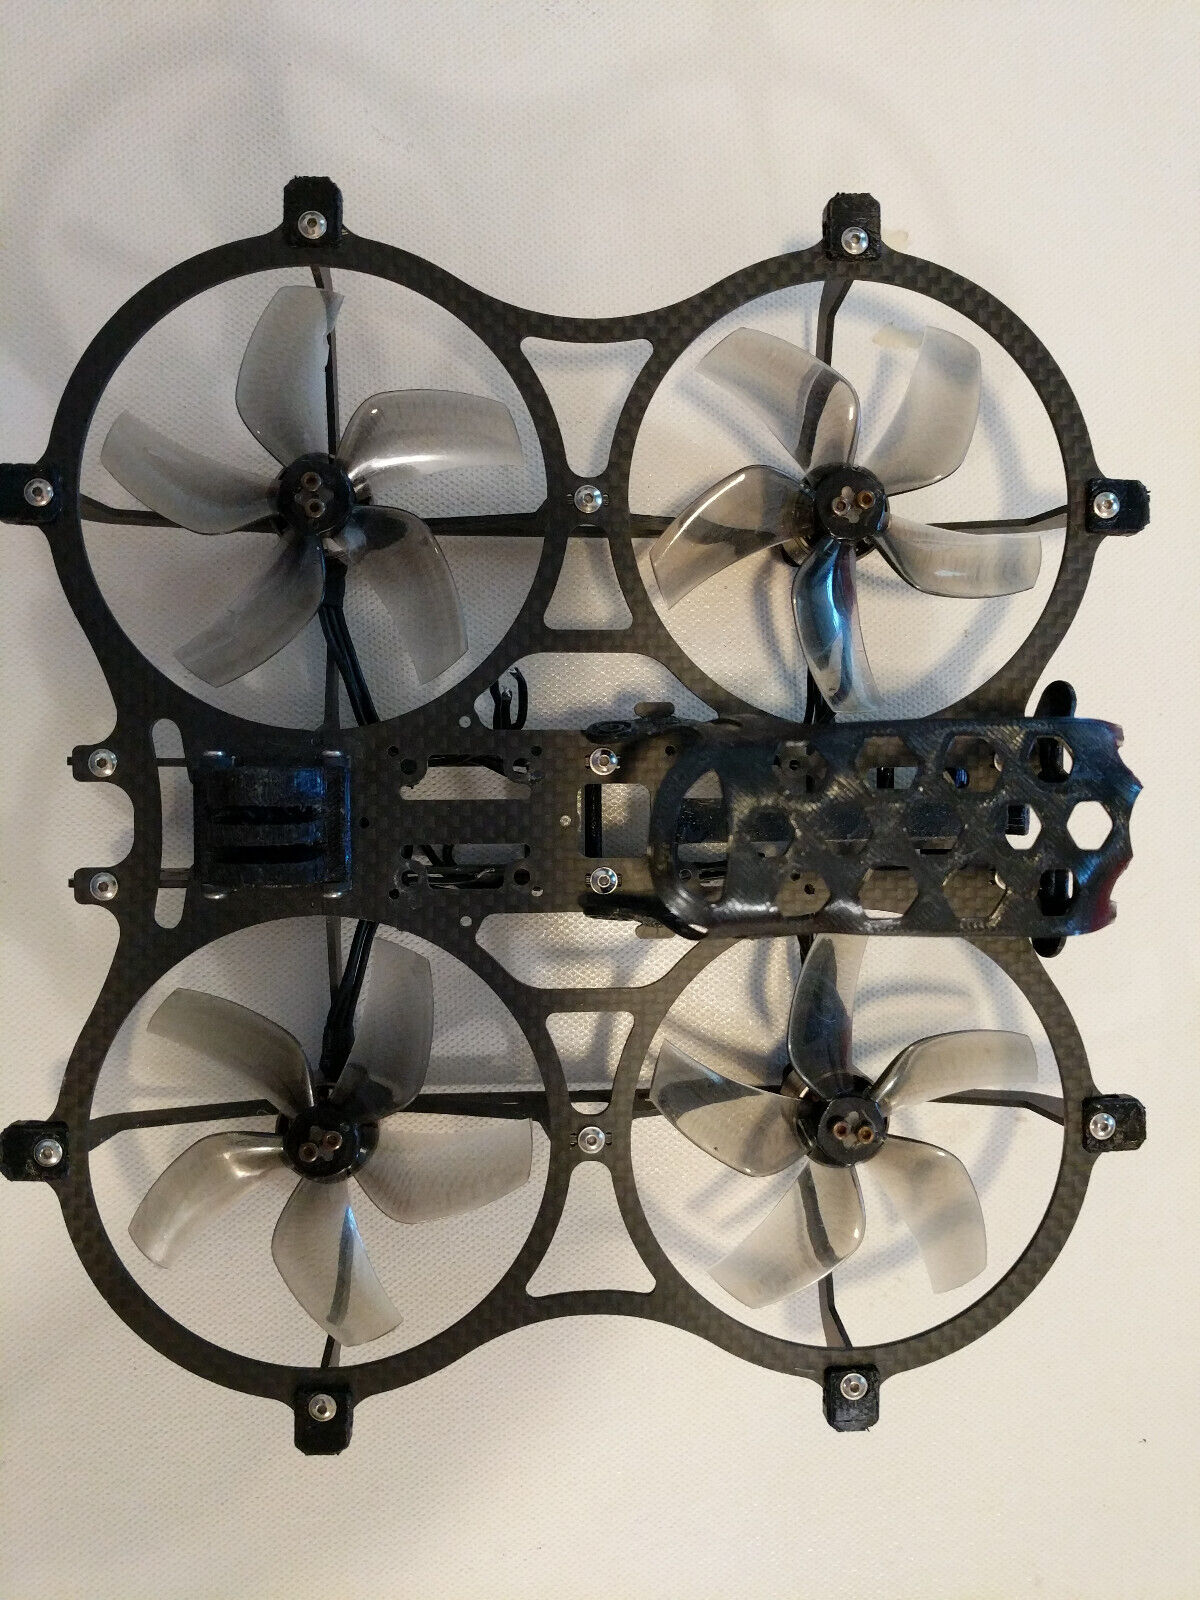 Cinemah quadcopter frame with motors